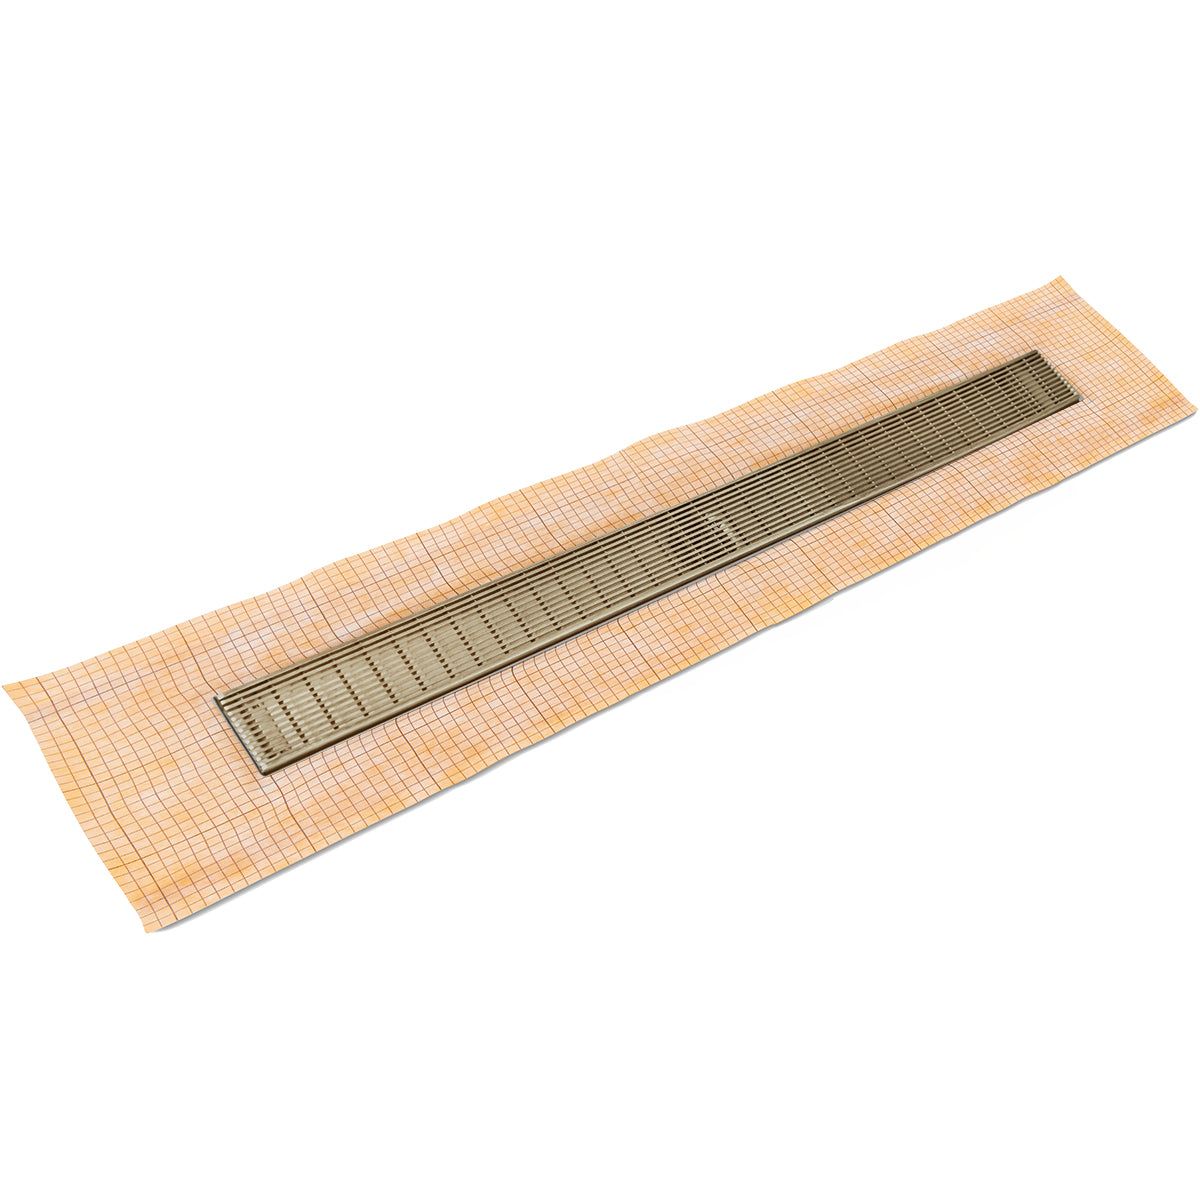 Infinity Drain 60" FCS Series Schluter-Kerdi - Fixed Flange Linear Drain Kit with 2 1/2" Wedge Wire Grate